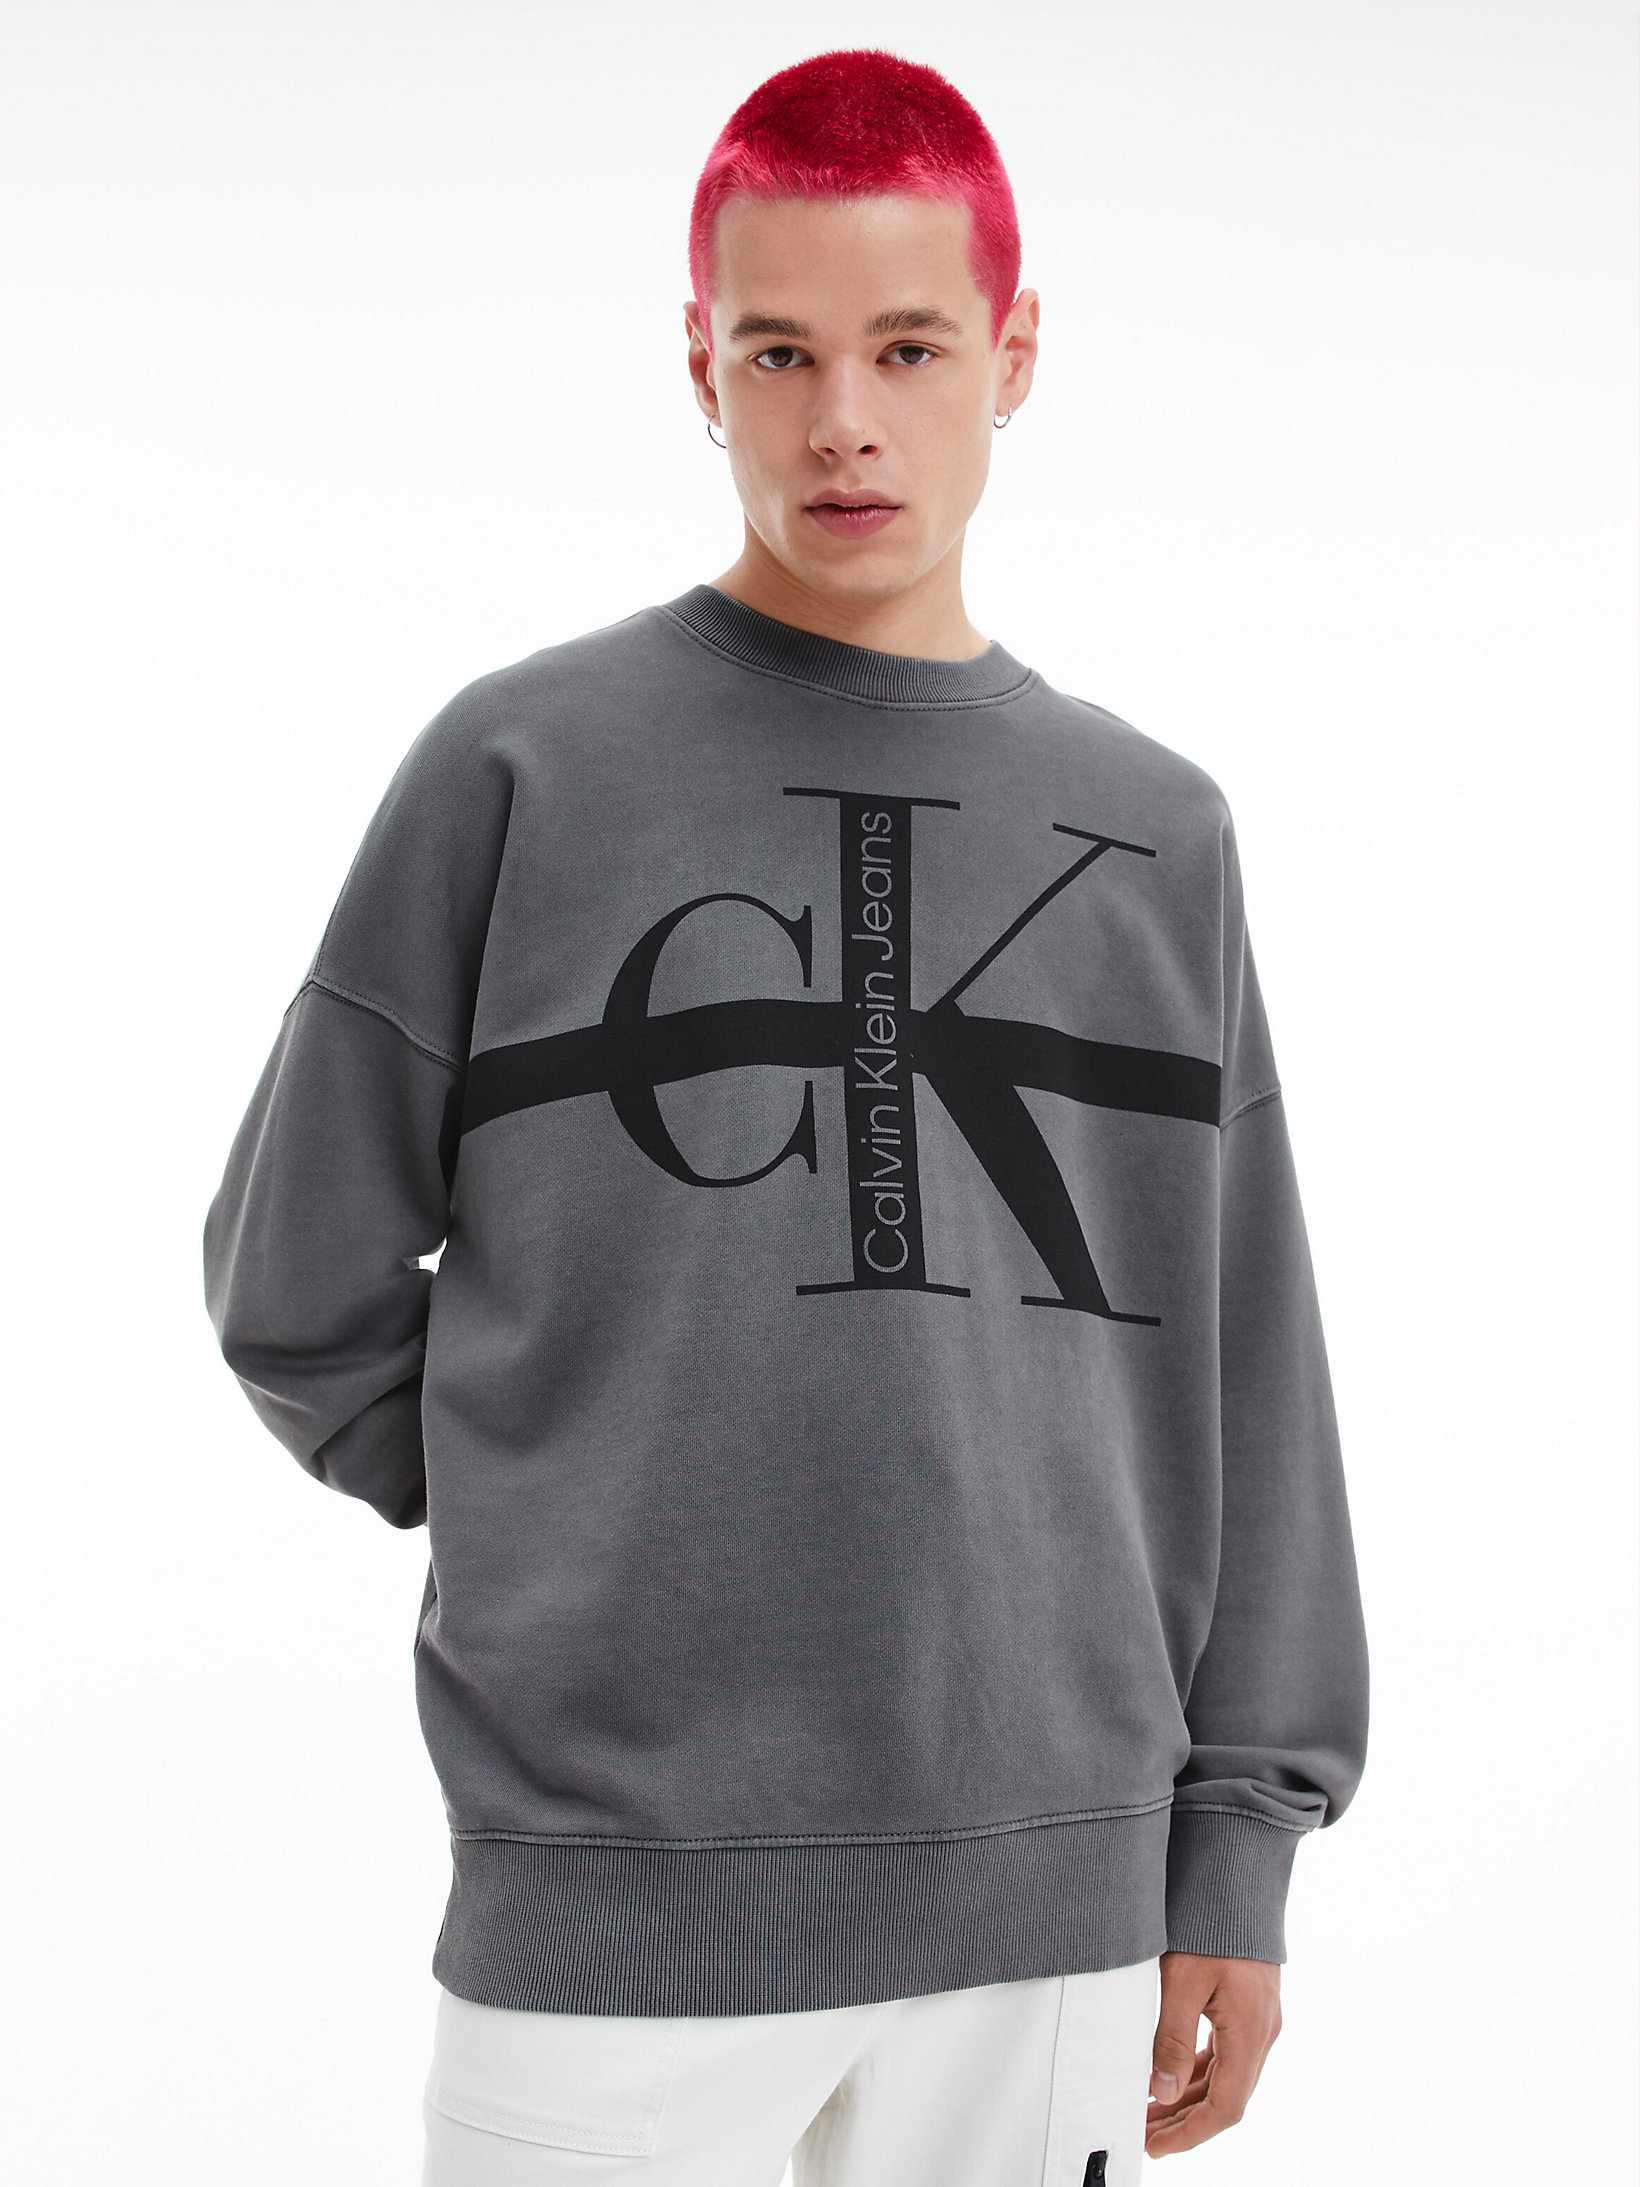 Sweat Monogramme Relaxed > Industrial Grey > undefined hommes > Calvin Klein